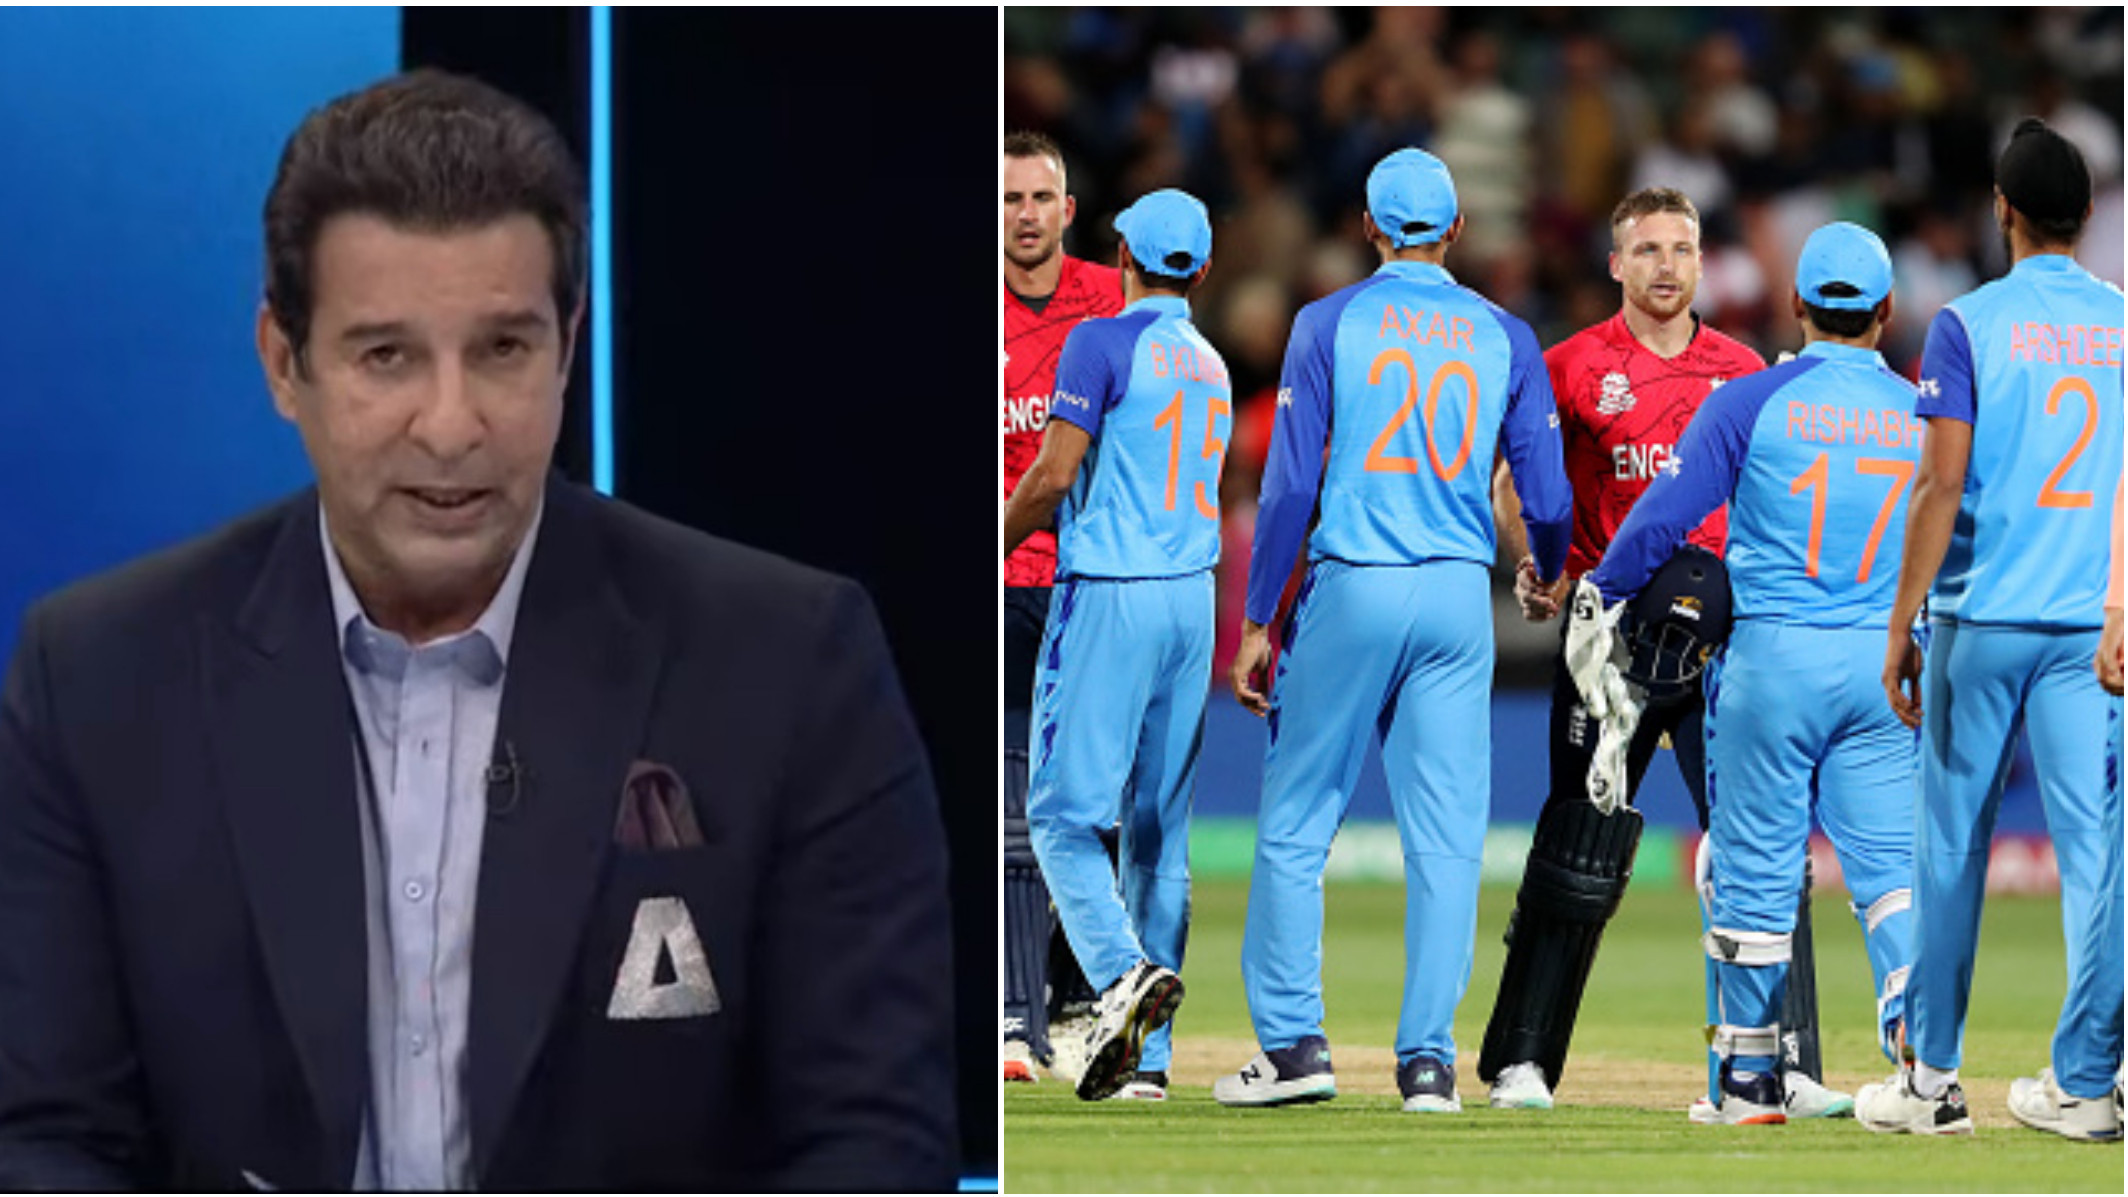 T20 World Cup 2022: “They drop pace post IPL”- Wasim Akram says about Indian pacers after T20 WC exit